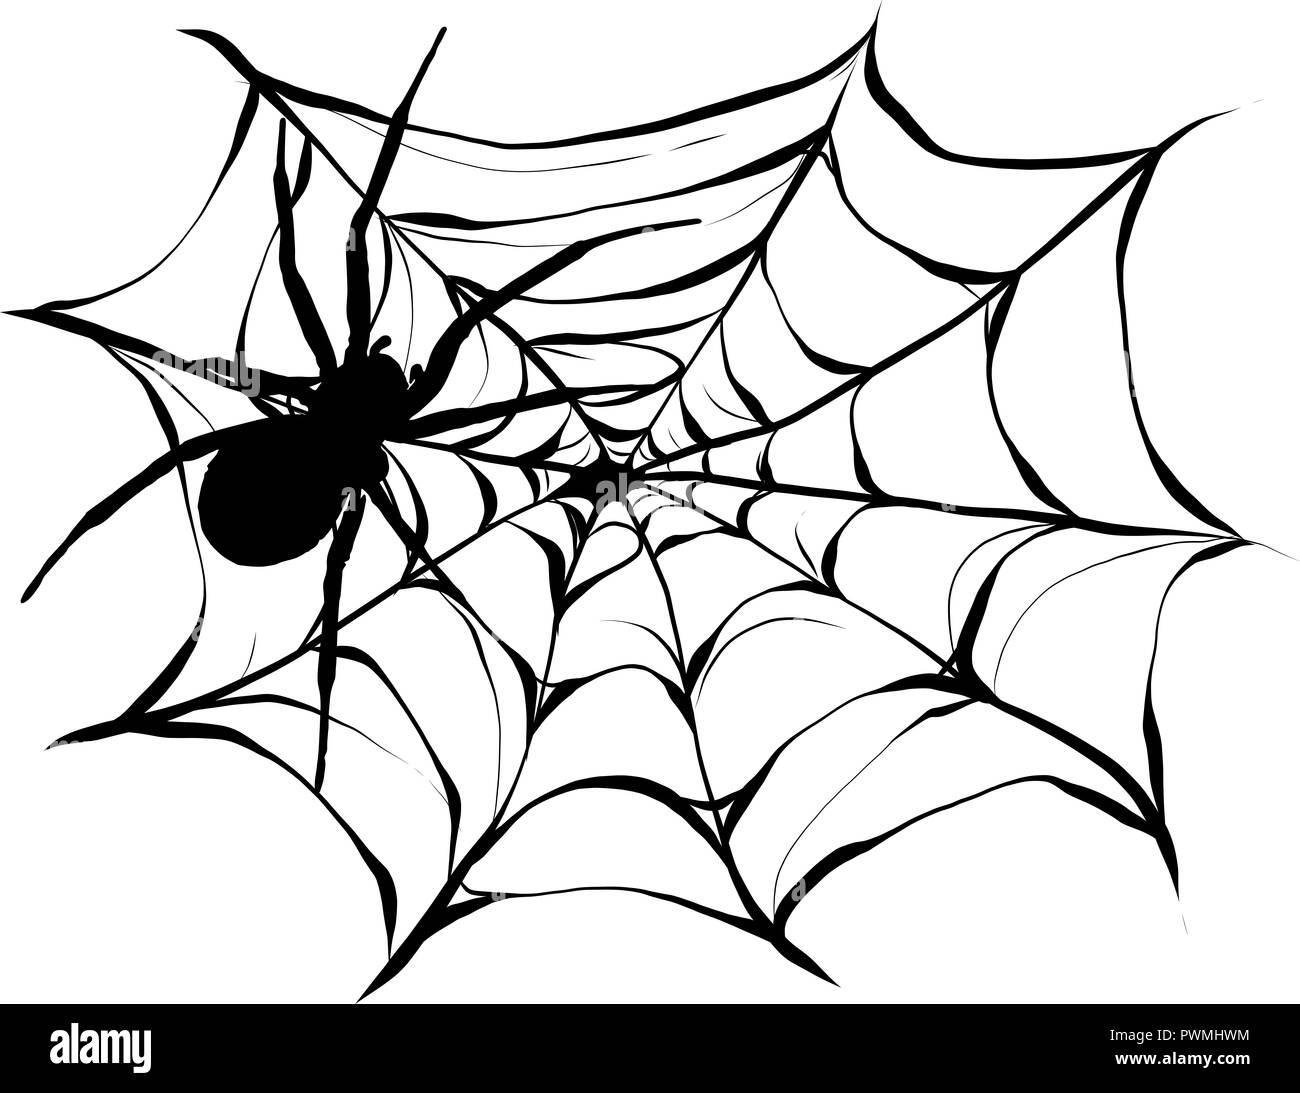 Black spider and torn web. Scary spiderweb of halloween symbol. Isolated on white  illustration Stock Photo